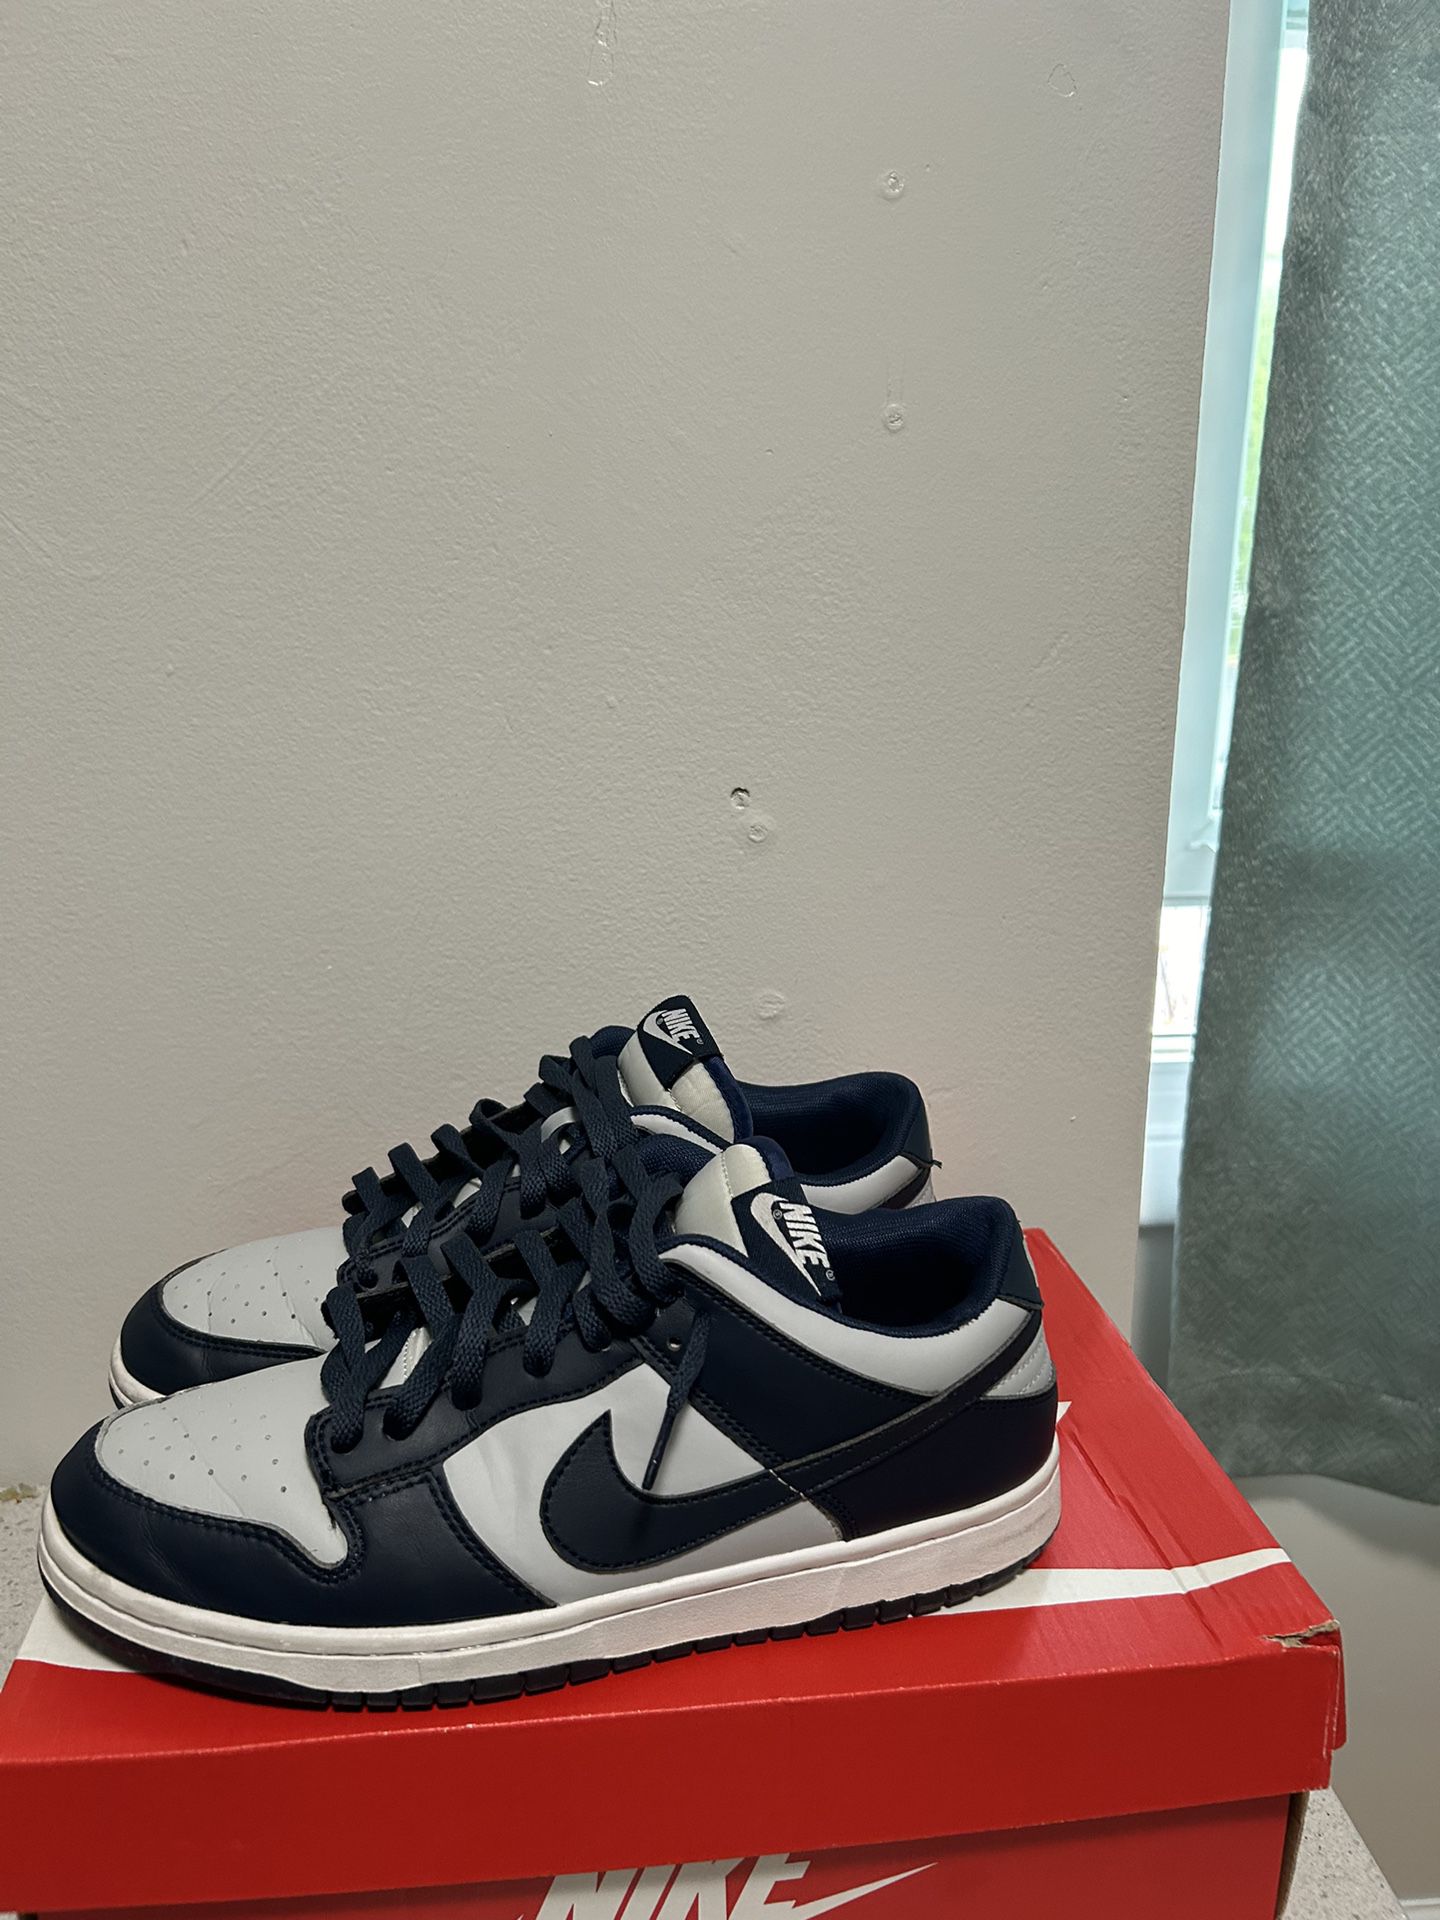 Georgetown Dunks (size 8.5)